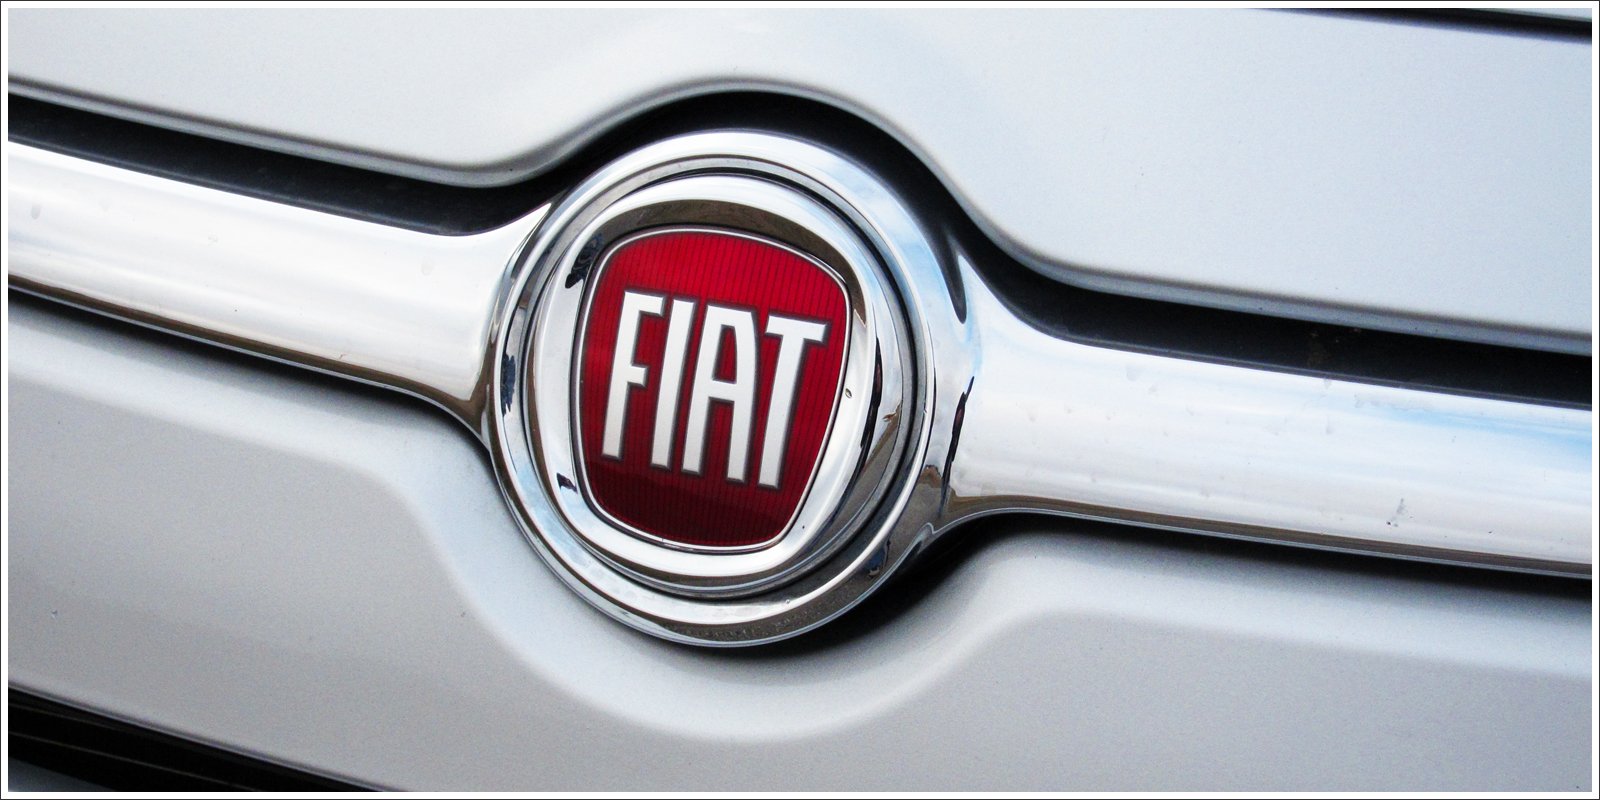 Fiat .eps Logo Vector Free Download - 466014 | TOPpng